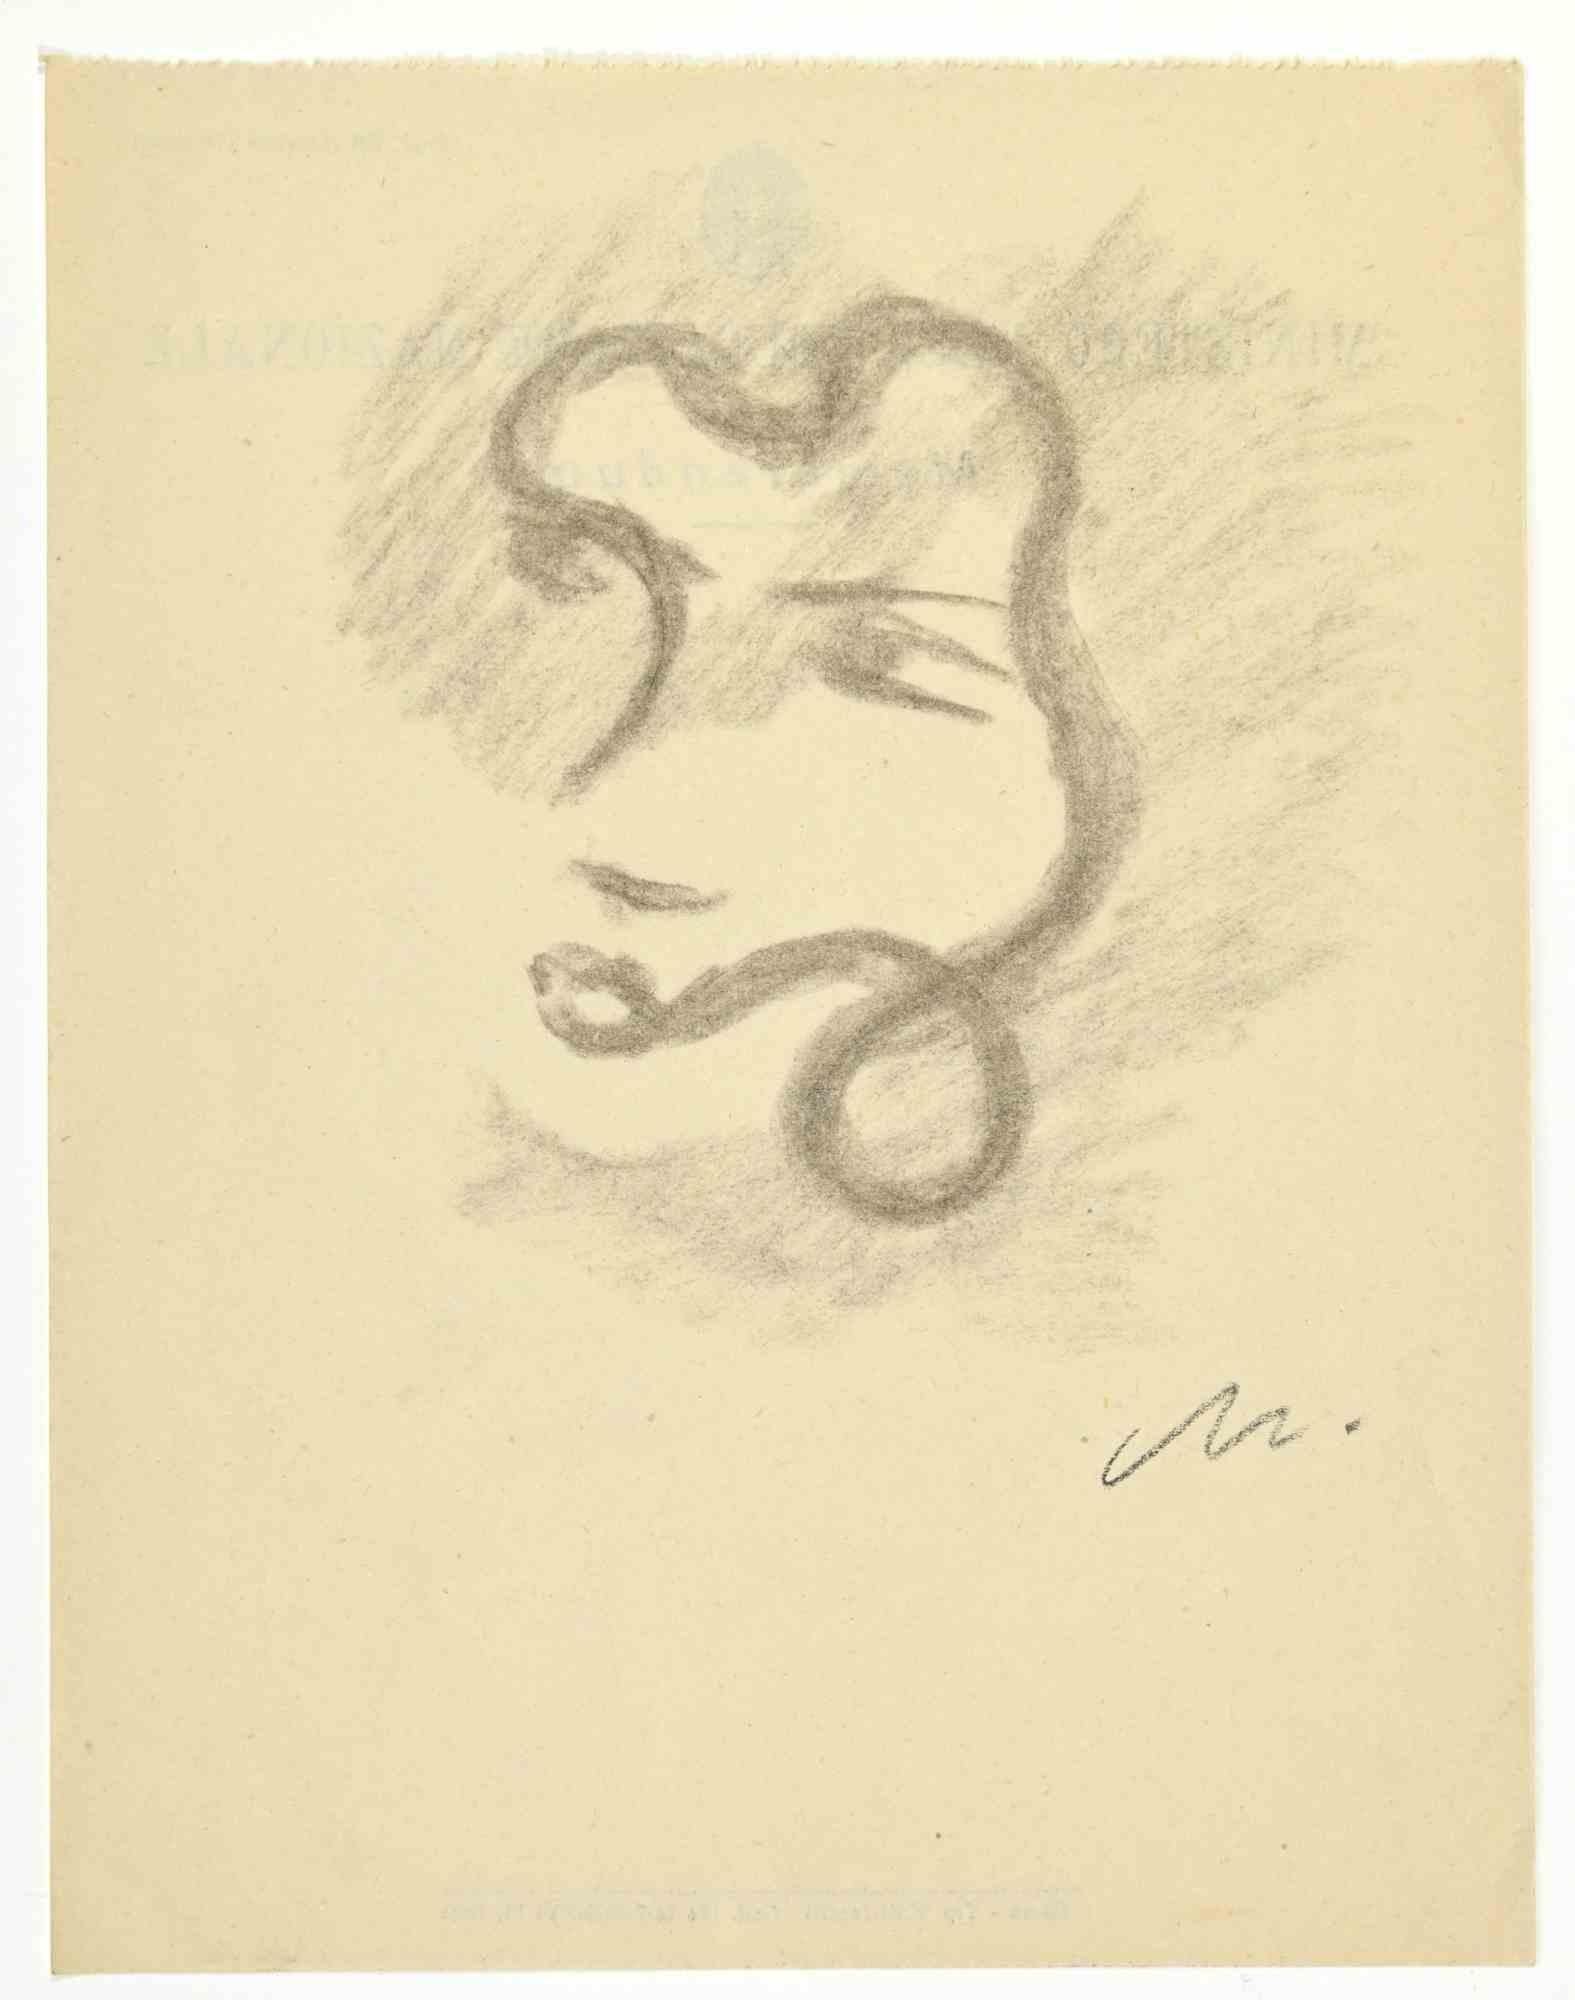 The Portrait is a Pencil Drawing realized by Mino Maccari  (1924-1989) in the 1940s.

Monogrammed on the lower.

Good condition.

Mino Maccari (Siena, 1924-Rome, June 16, 1989) was an Italian writer, painter, engraver and journalist, winner of the